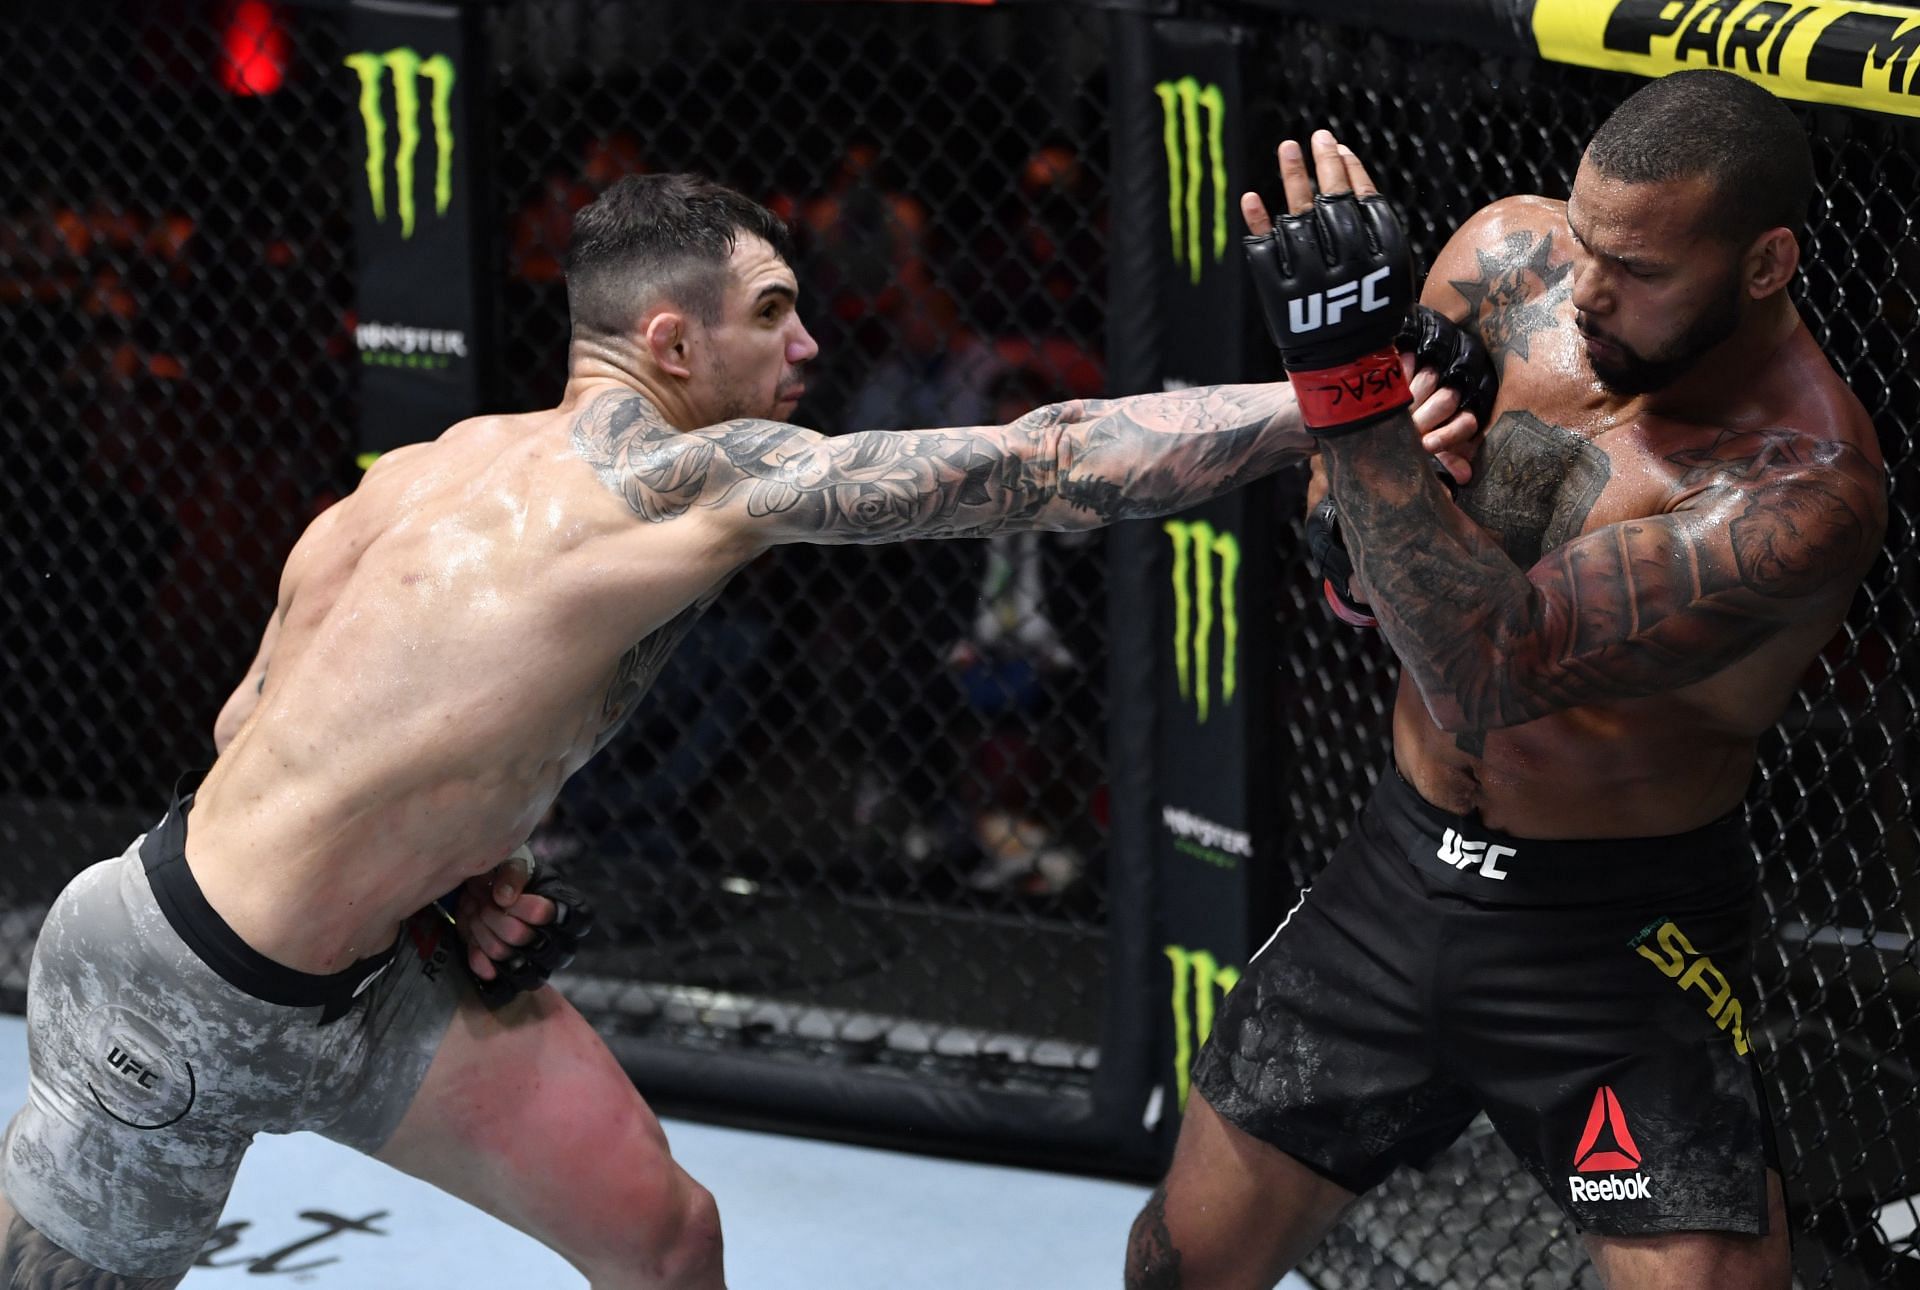 5 great UFC fights to look forward to in May